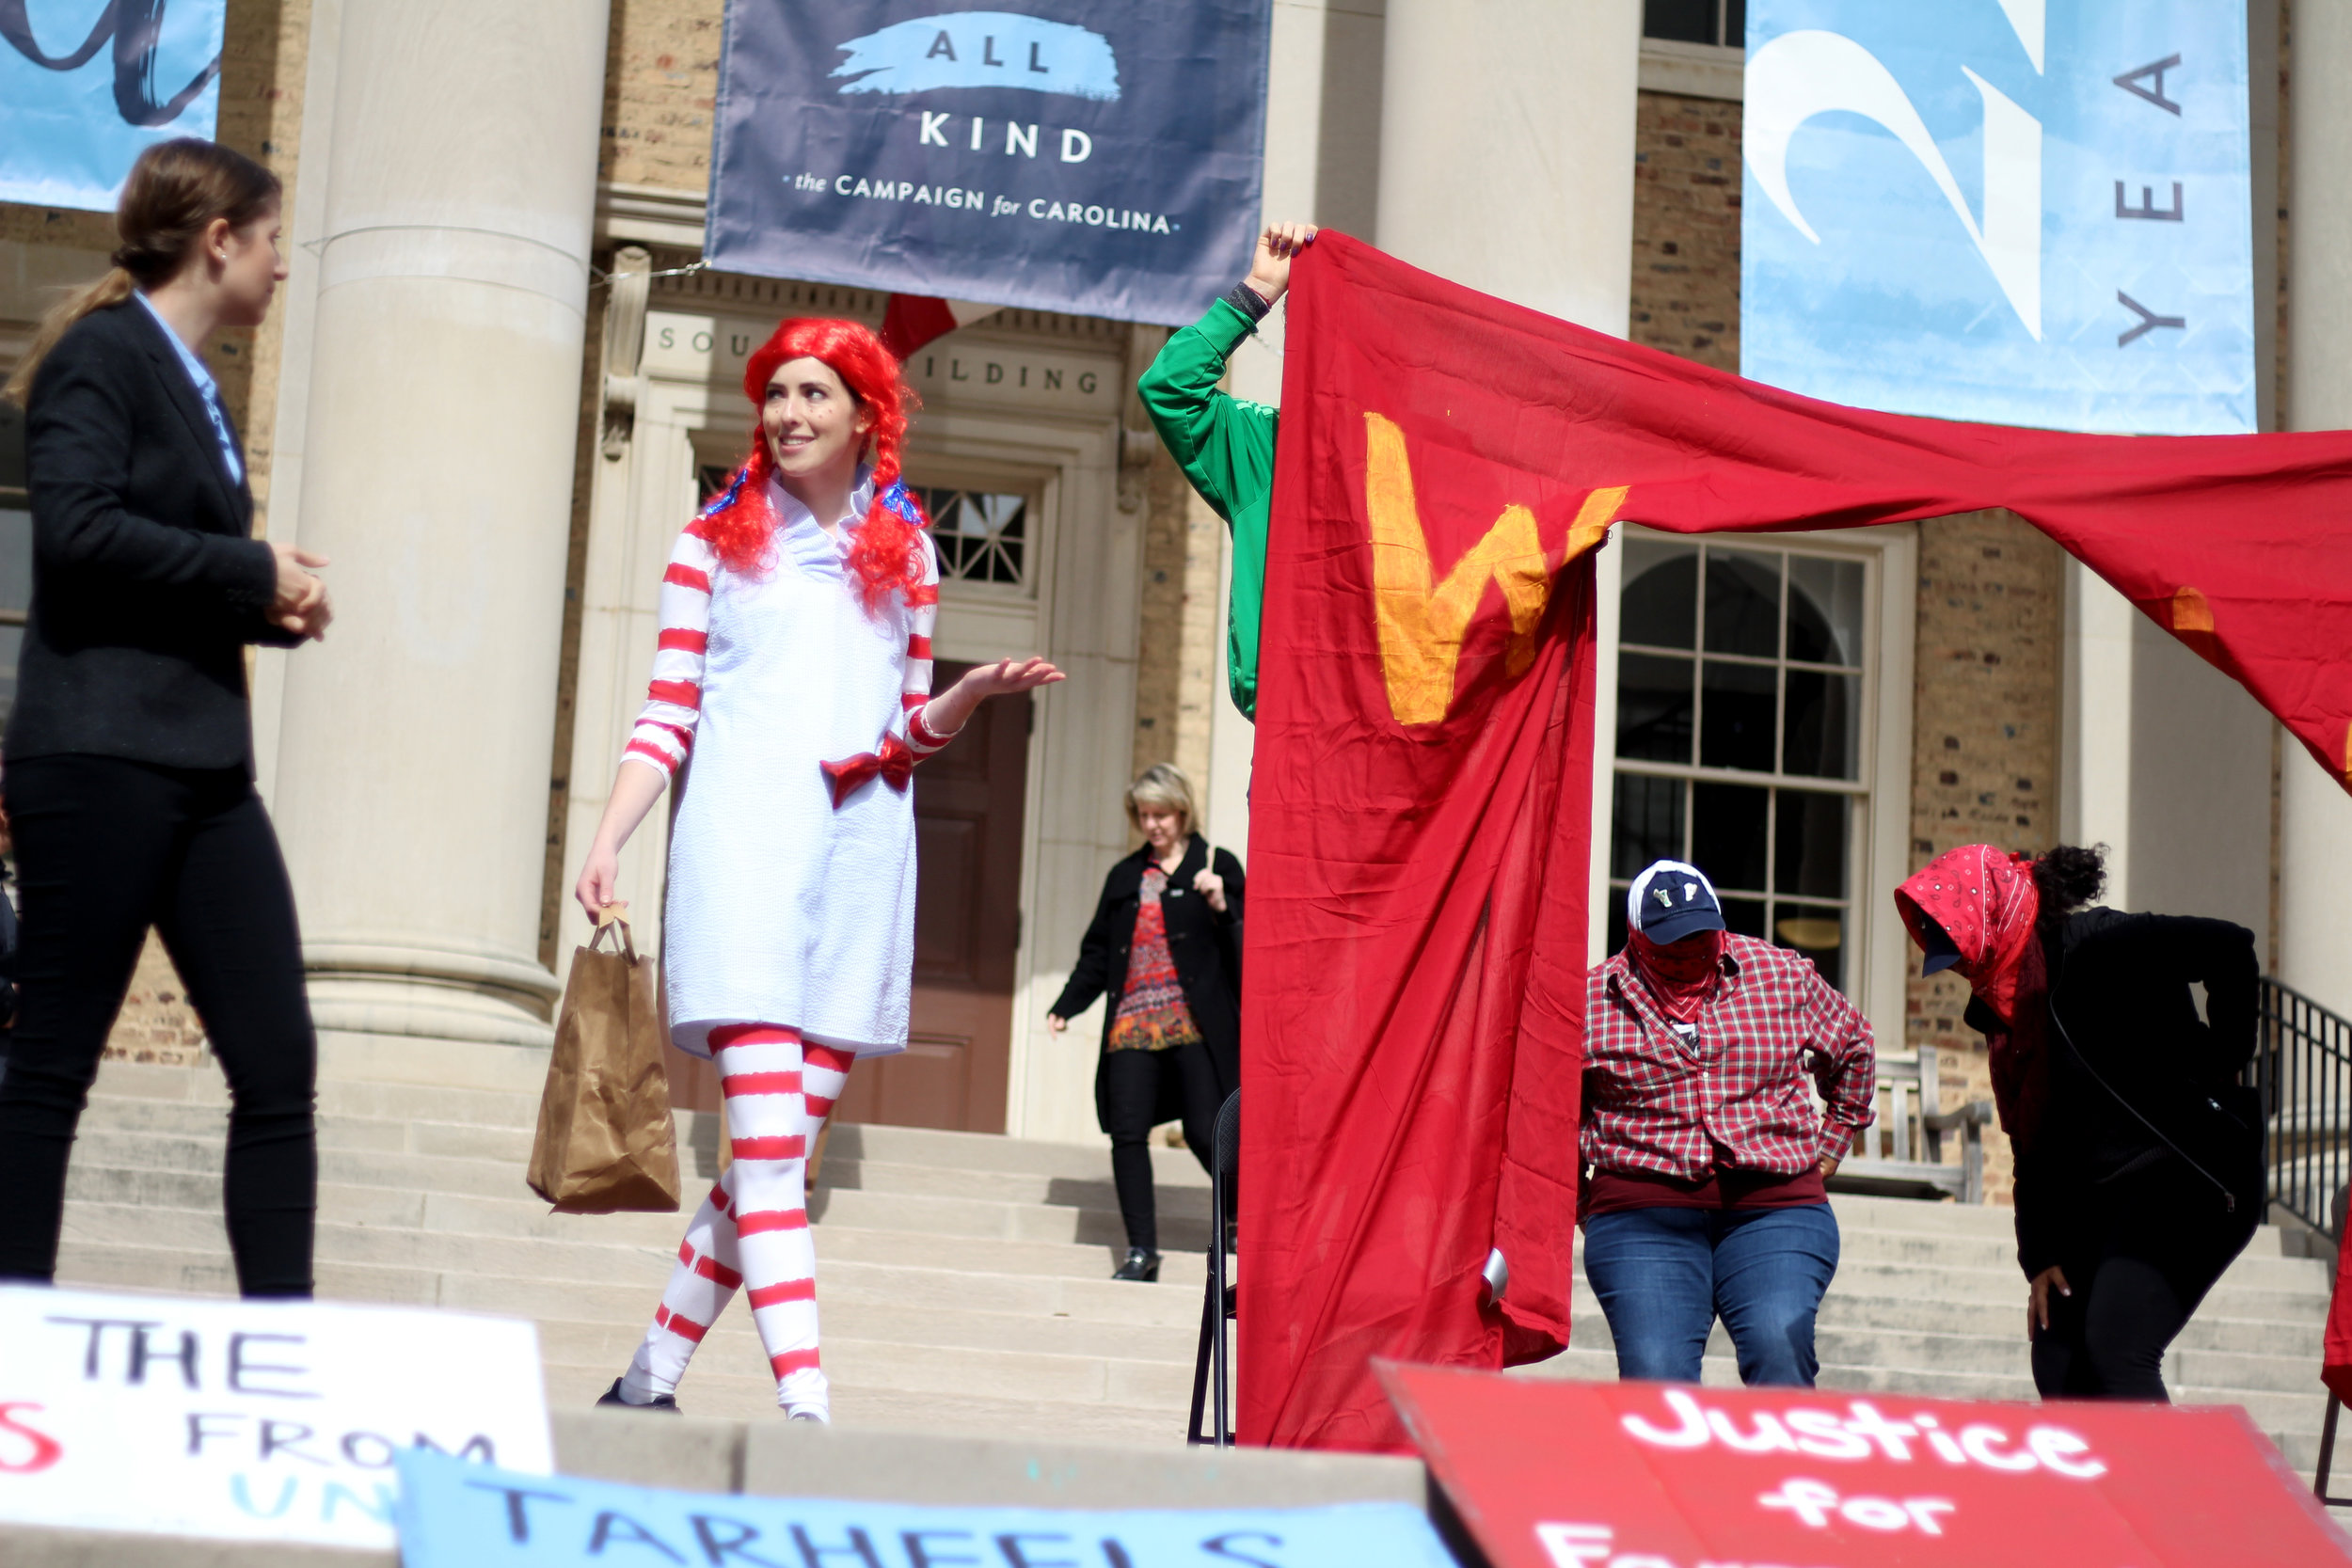  Students at University of North Carolina at Chapel Hill stage a theater skit on the steps of UNC Chancellor Folt’s office to highlight the University’s complicity in human rights abuses. 